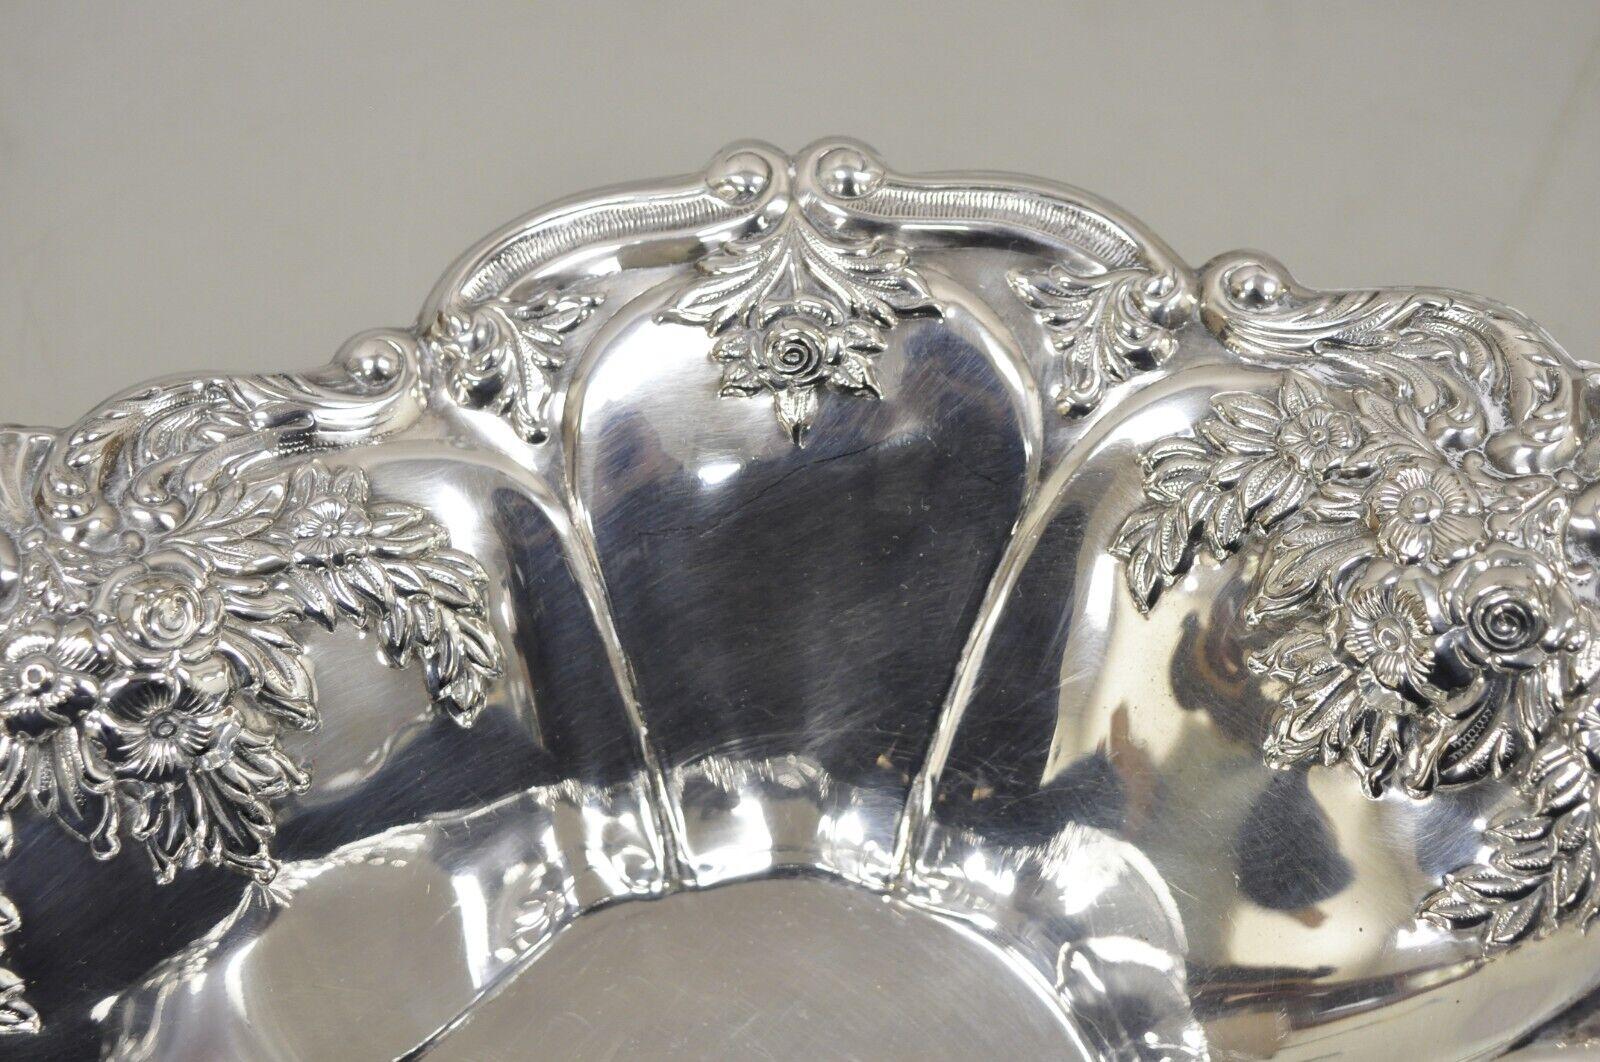 Victorian Silver Plated Floral Repousse Trinket Dish Serving Bowl Platter For Sale 2